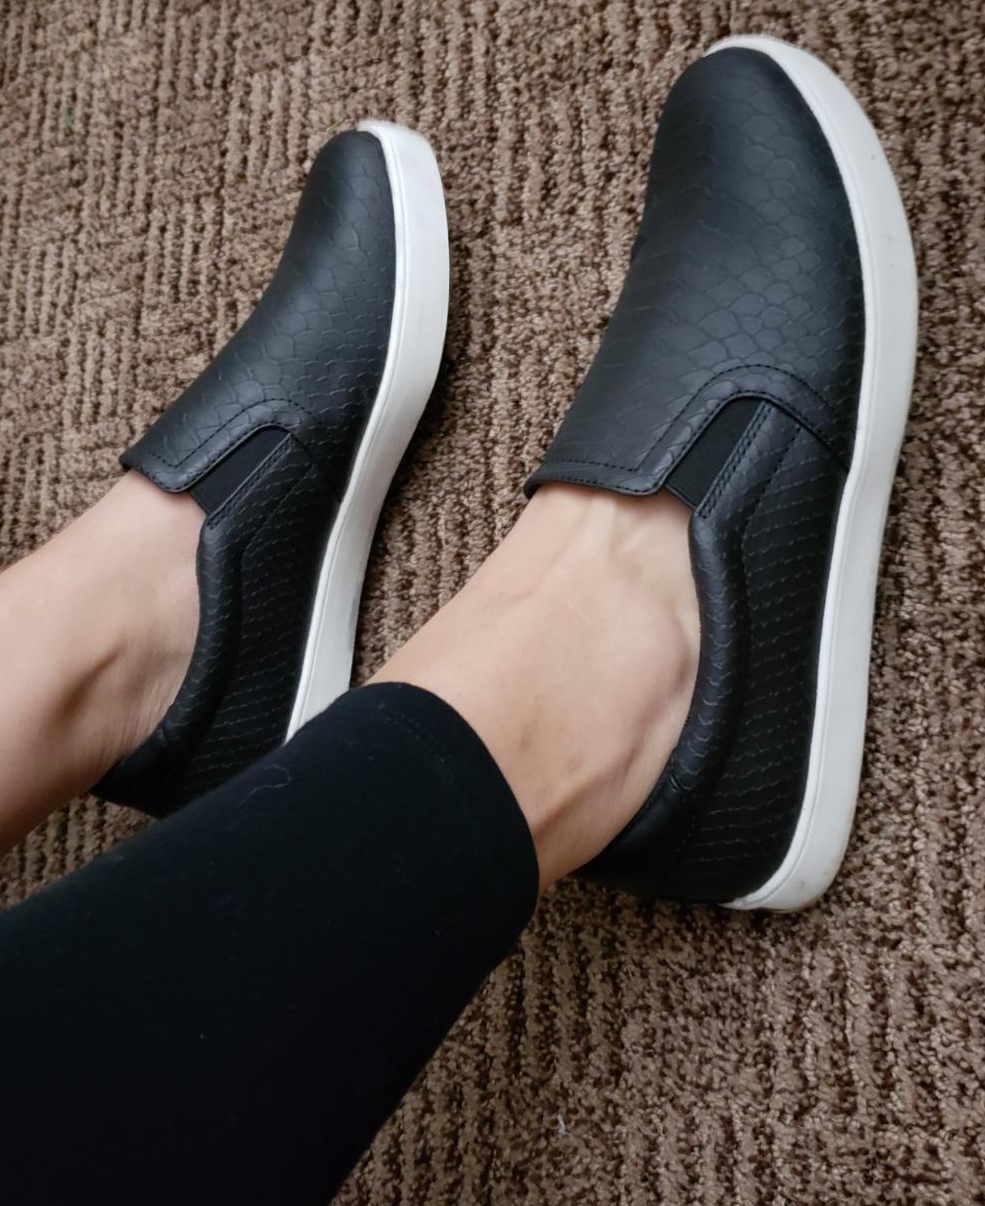 Person wearing black slip-on sneakers, suitable for a comfortable and casual style